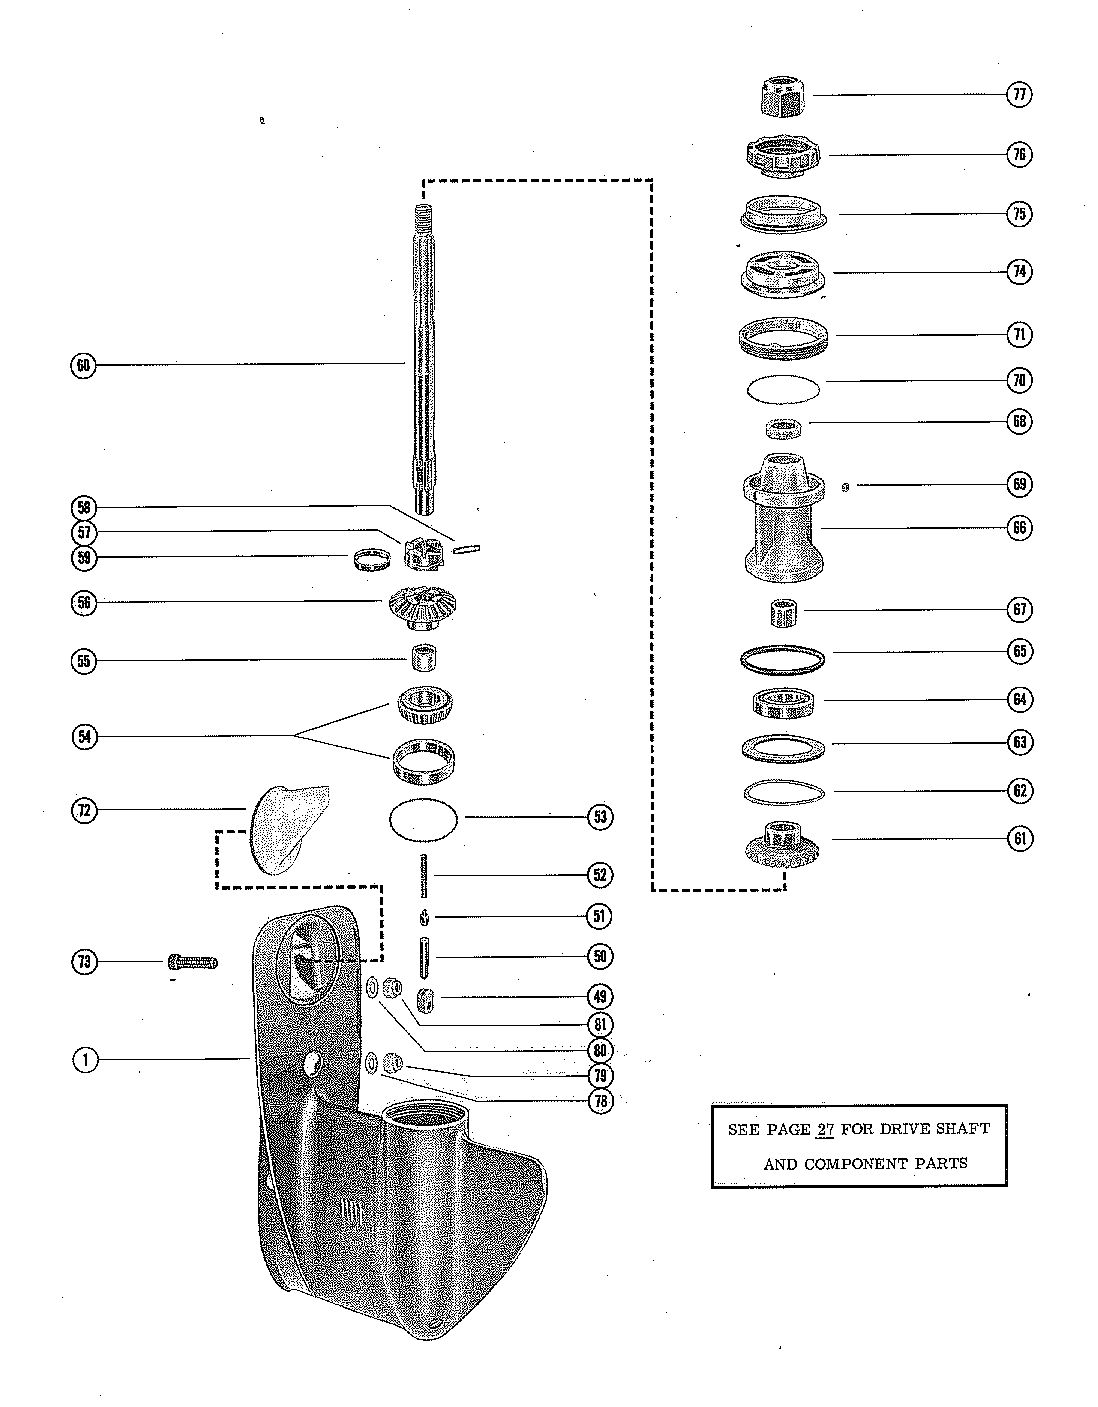 MERCURY MERC 400 GEAR HOUSING ASSEMBLY, COMPLETE (PAGE 2)